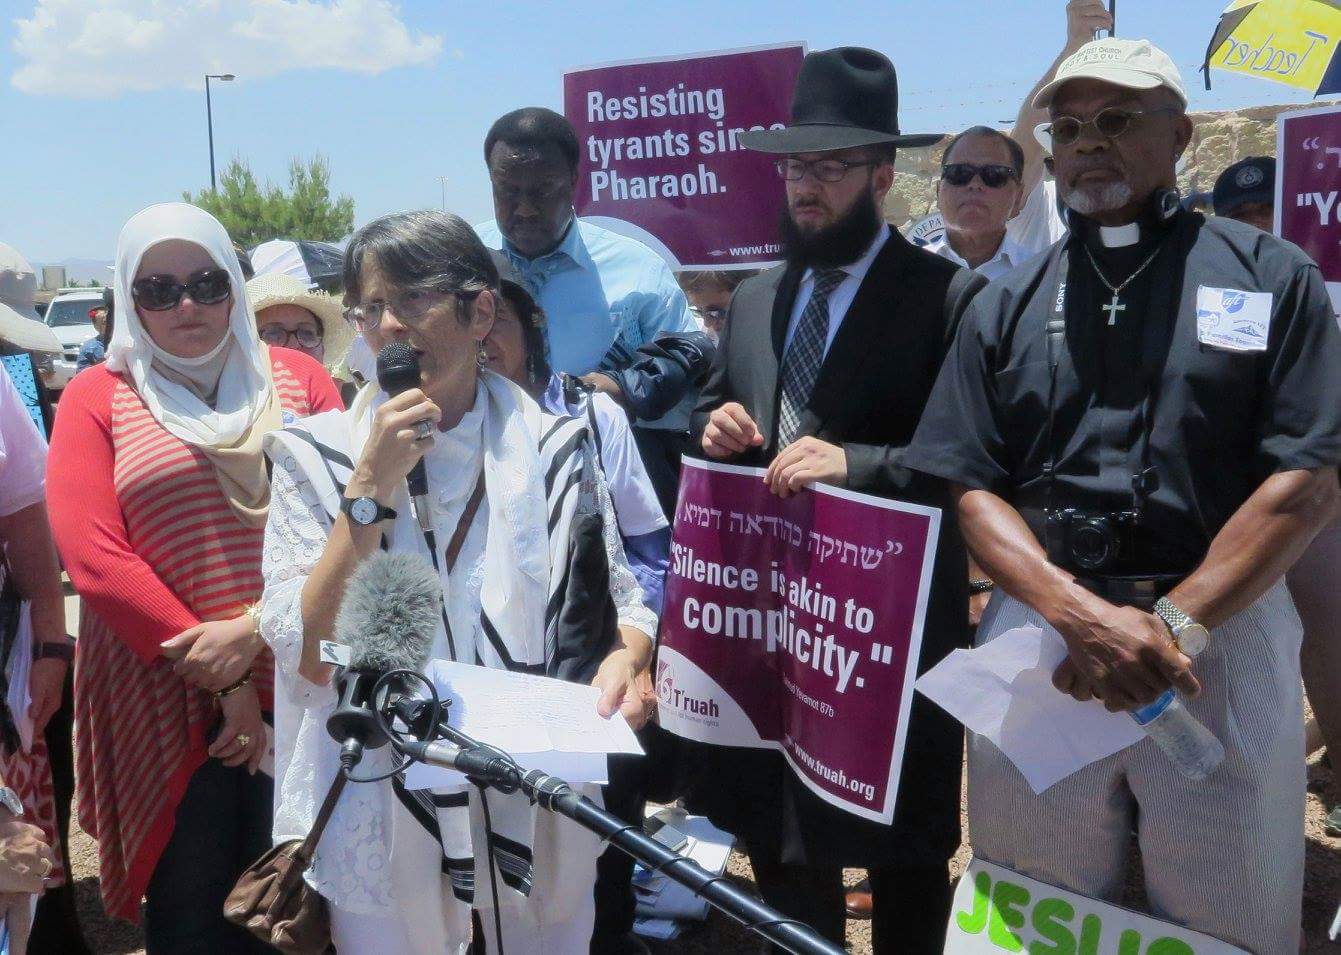 Sharon Cohen Anisfeld with interfaith leaders at TX detention camp